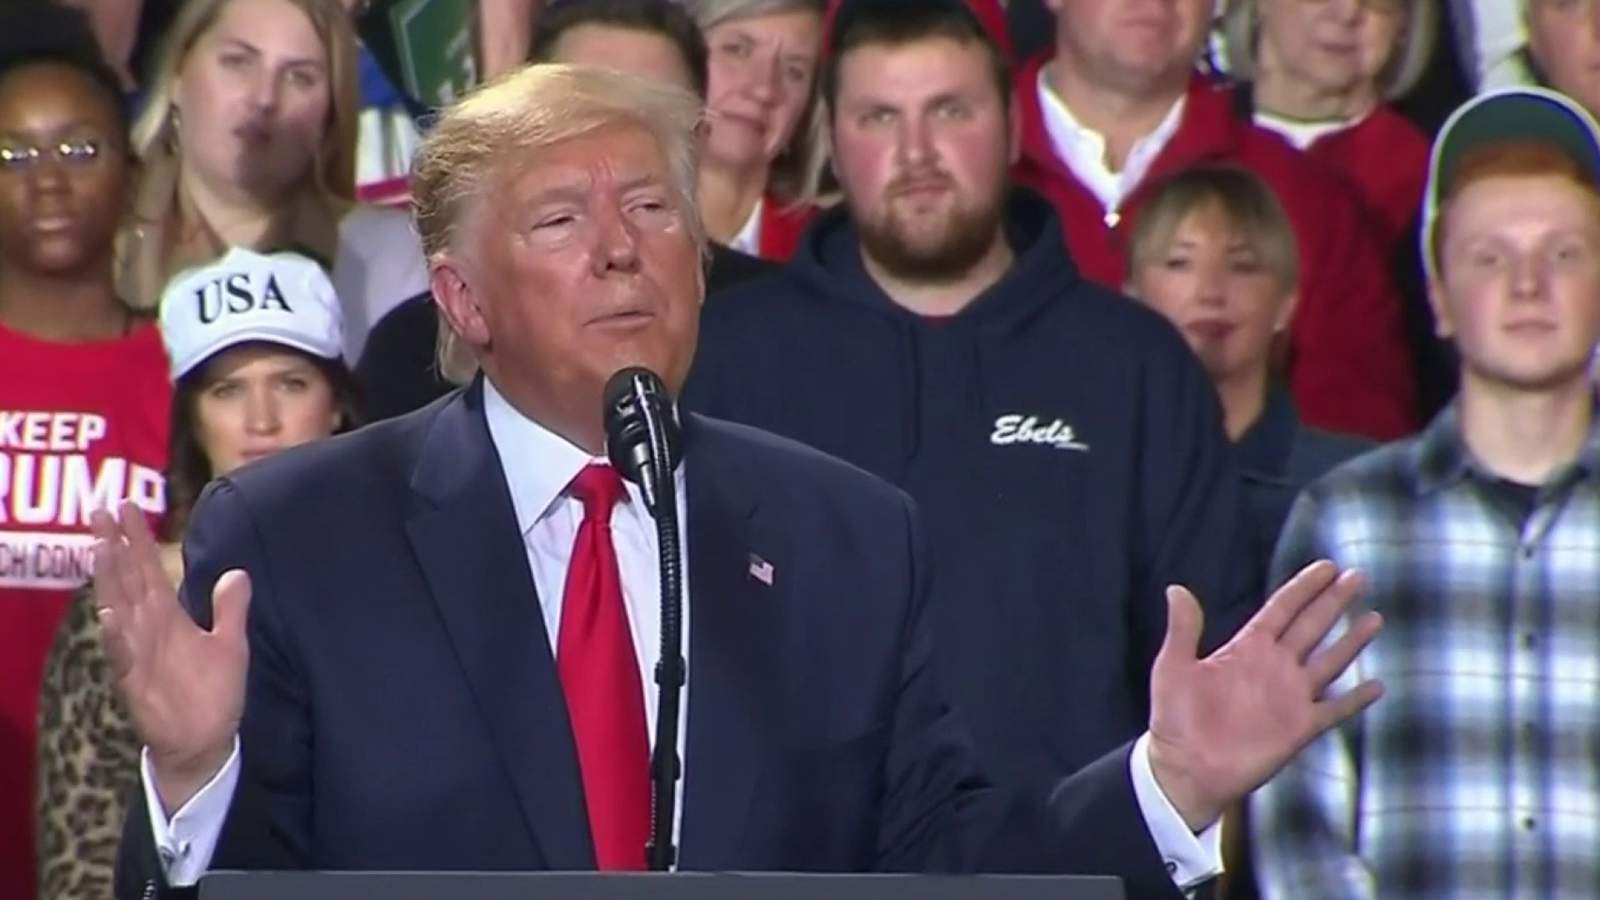 During Michigan rally, Trump suggests John Dingell is ‘looking up’